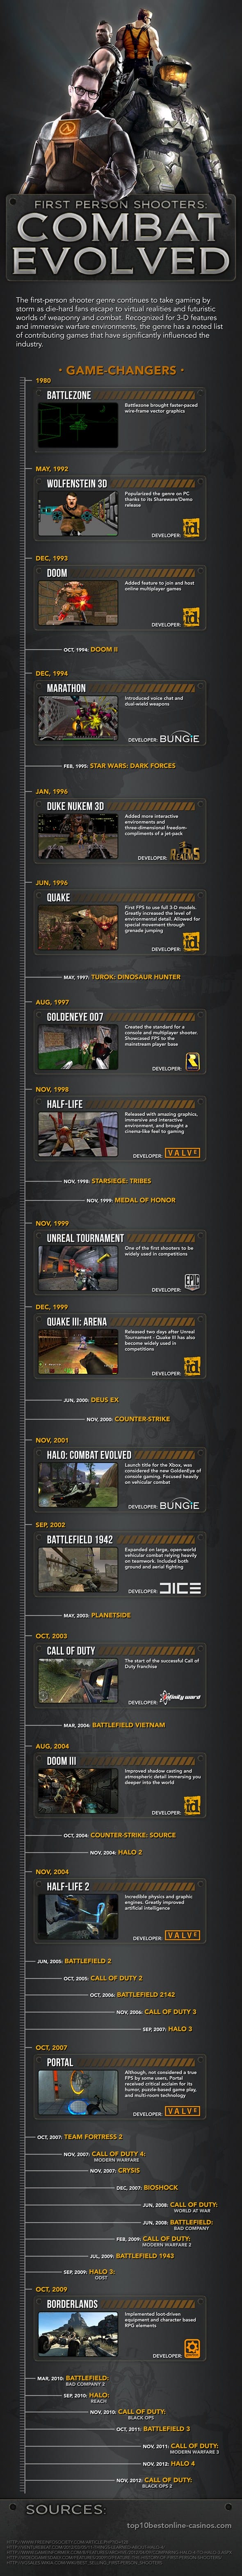 The Building Blocks of FPS [Click to open bigger image]